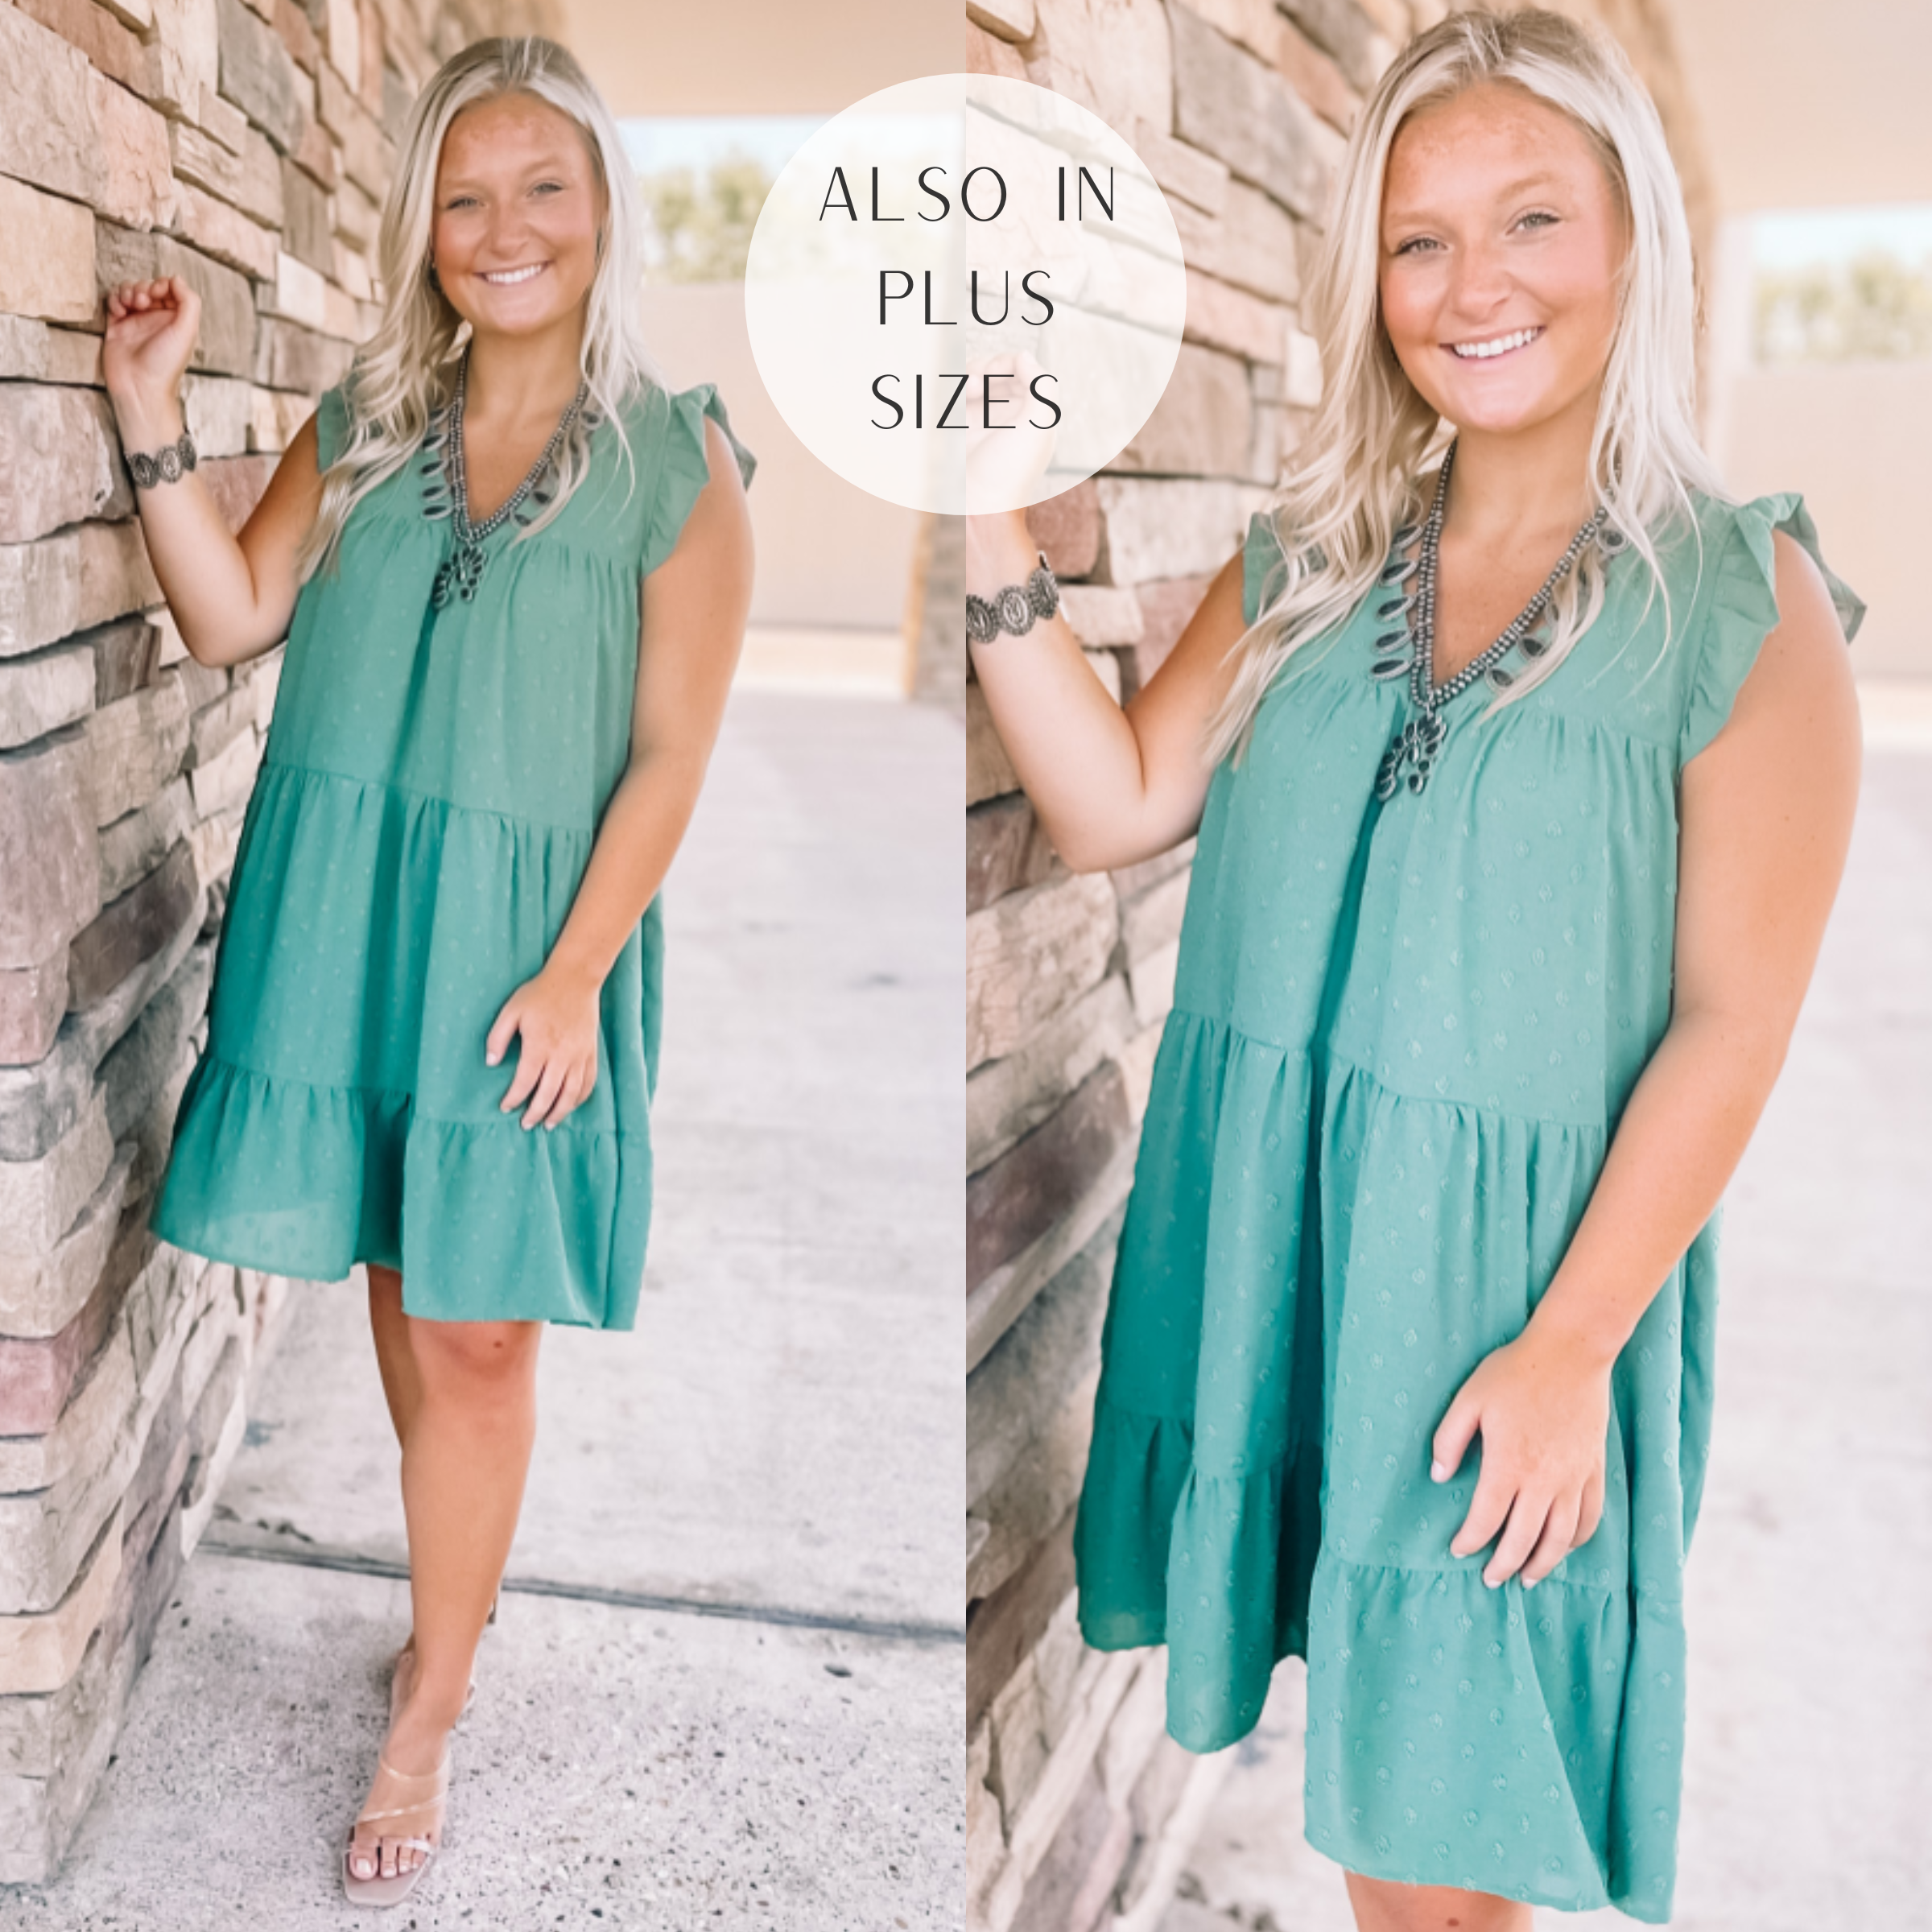 Real Romance Swiss Dot Tiered Dress with Ruffle Cap Sleeves in Olive Green - Giddy Up Glamour Boutique